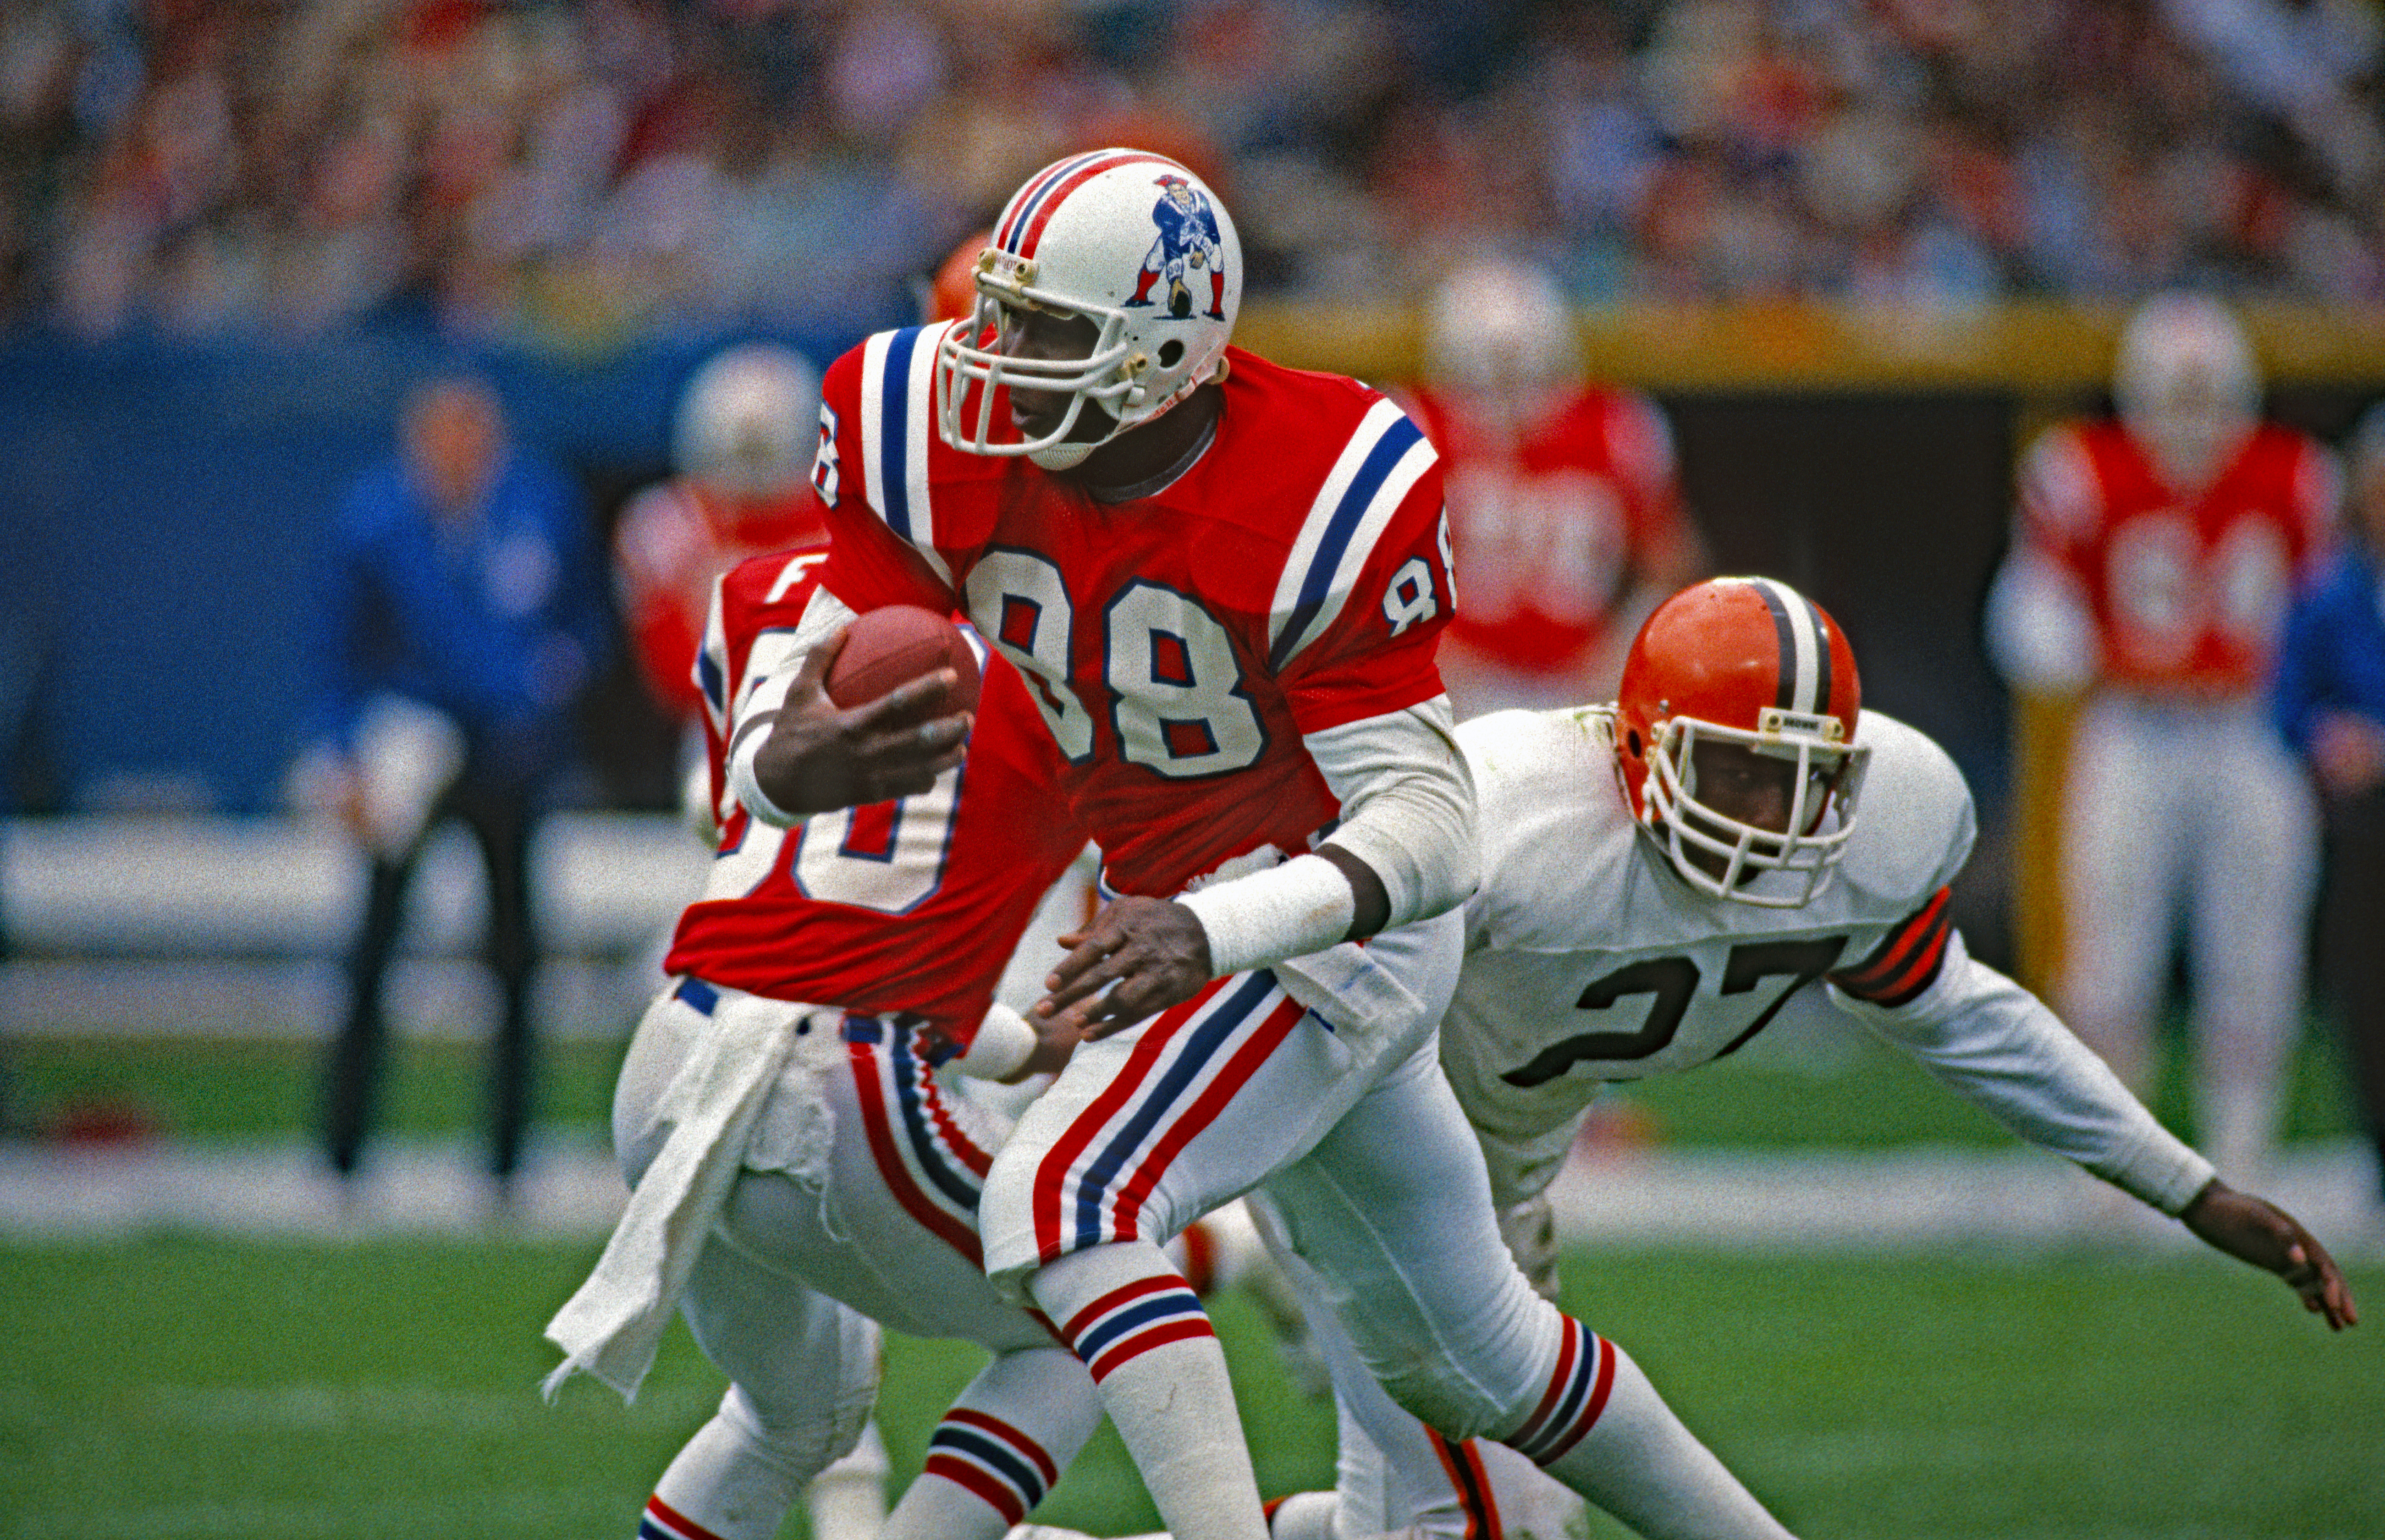 The 20 Best Uniforms in NFL History Made Football Fashionable - FanBuzz